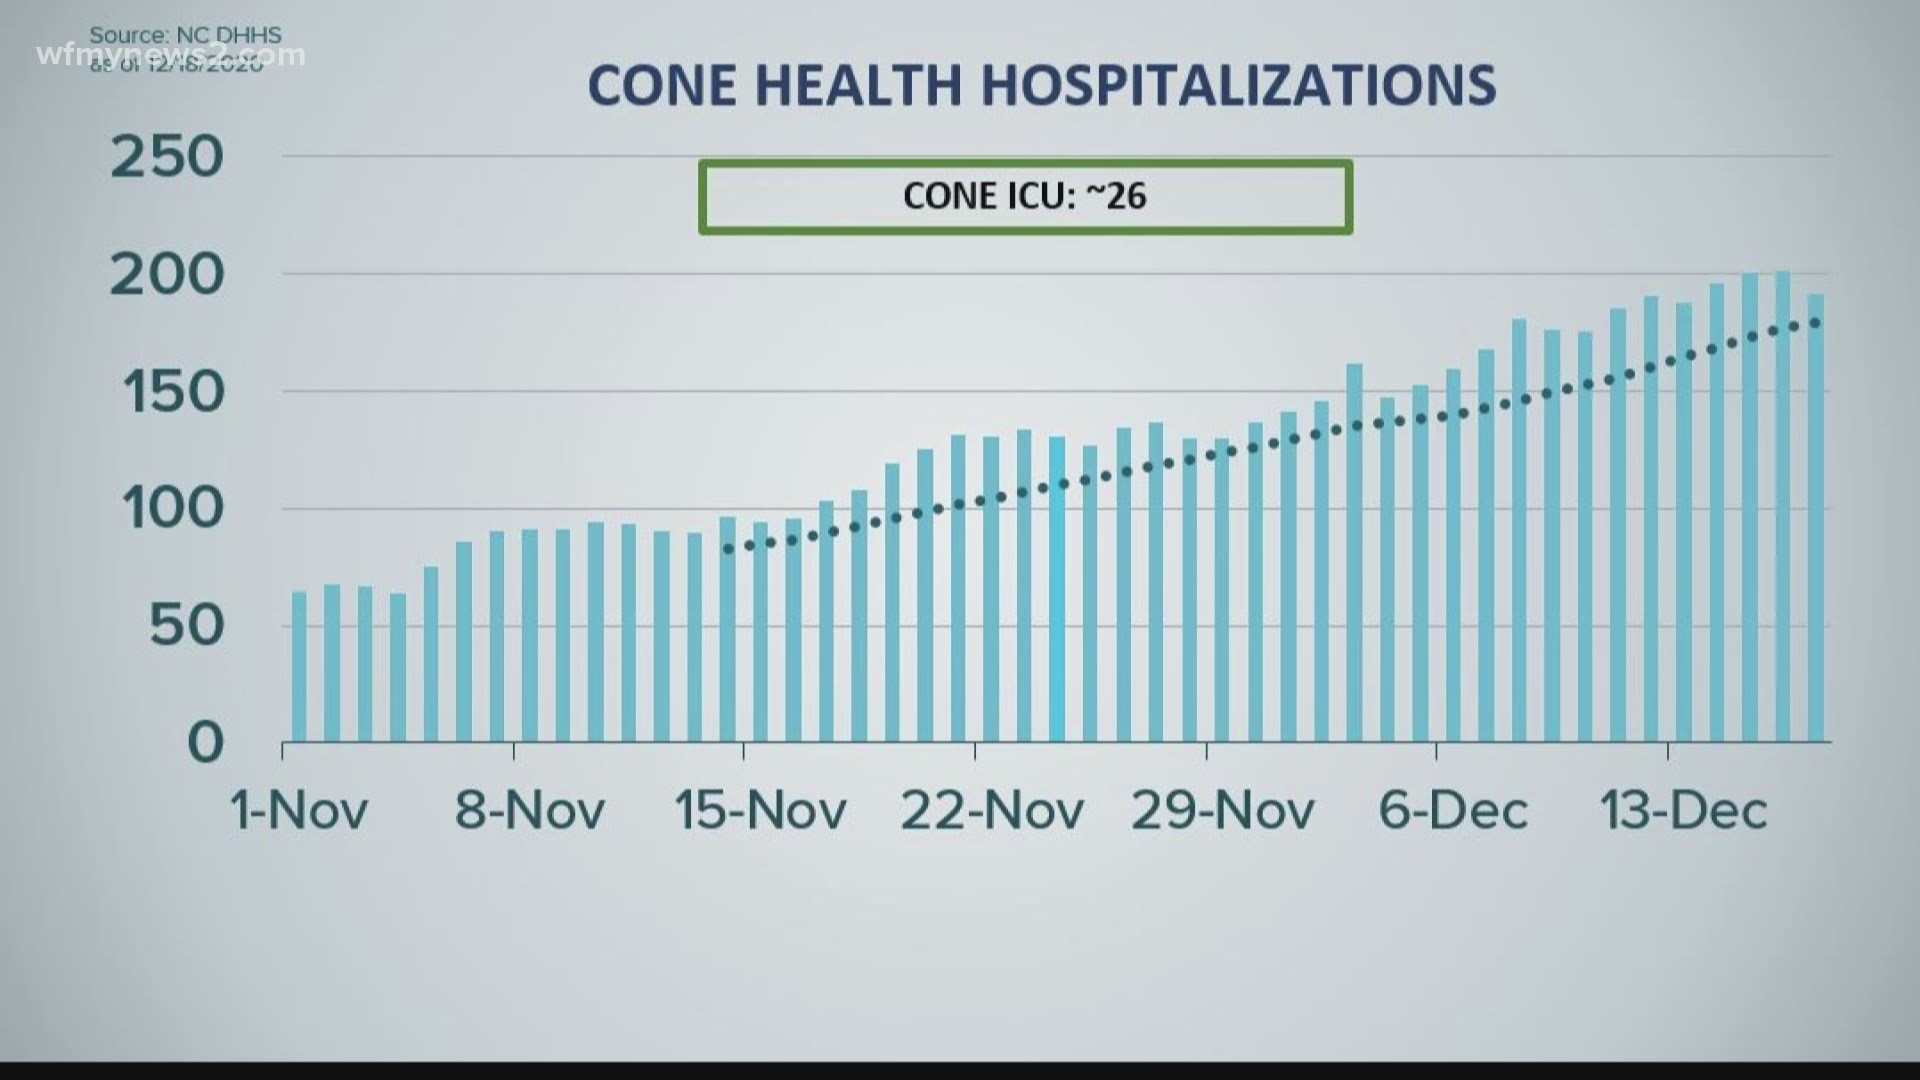 Cone Health reports hospitalizations in the 200s this week, as the NC DHHS warns of expected Christmas spread.